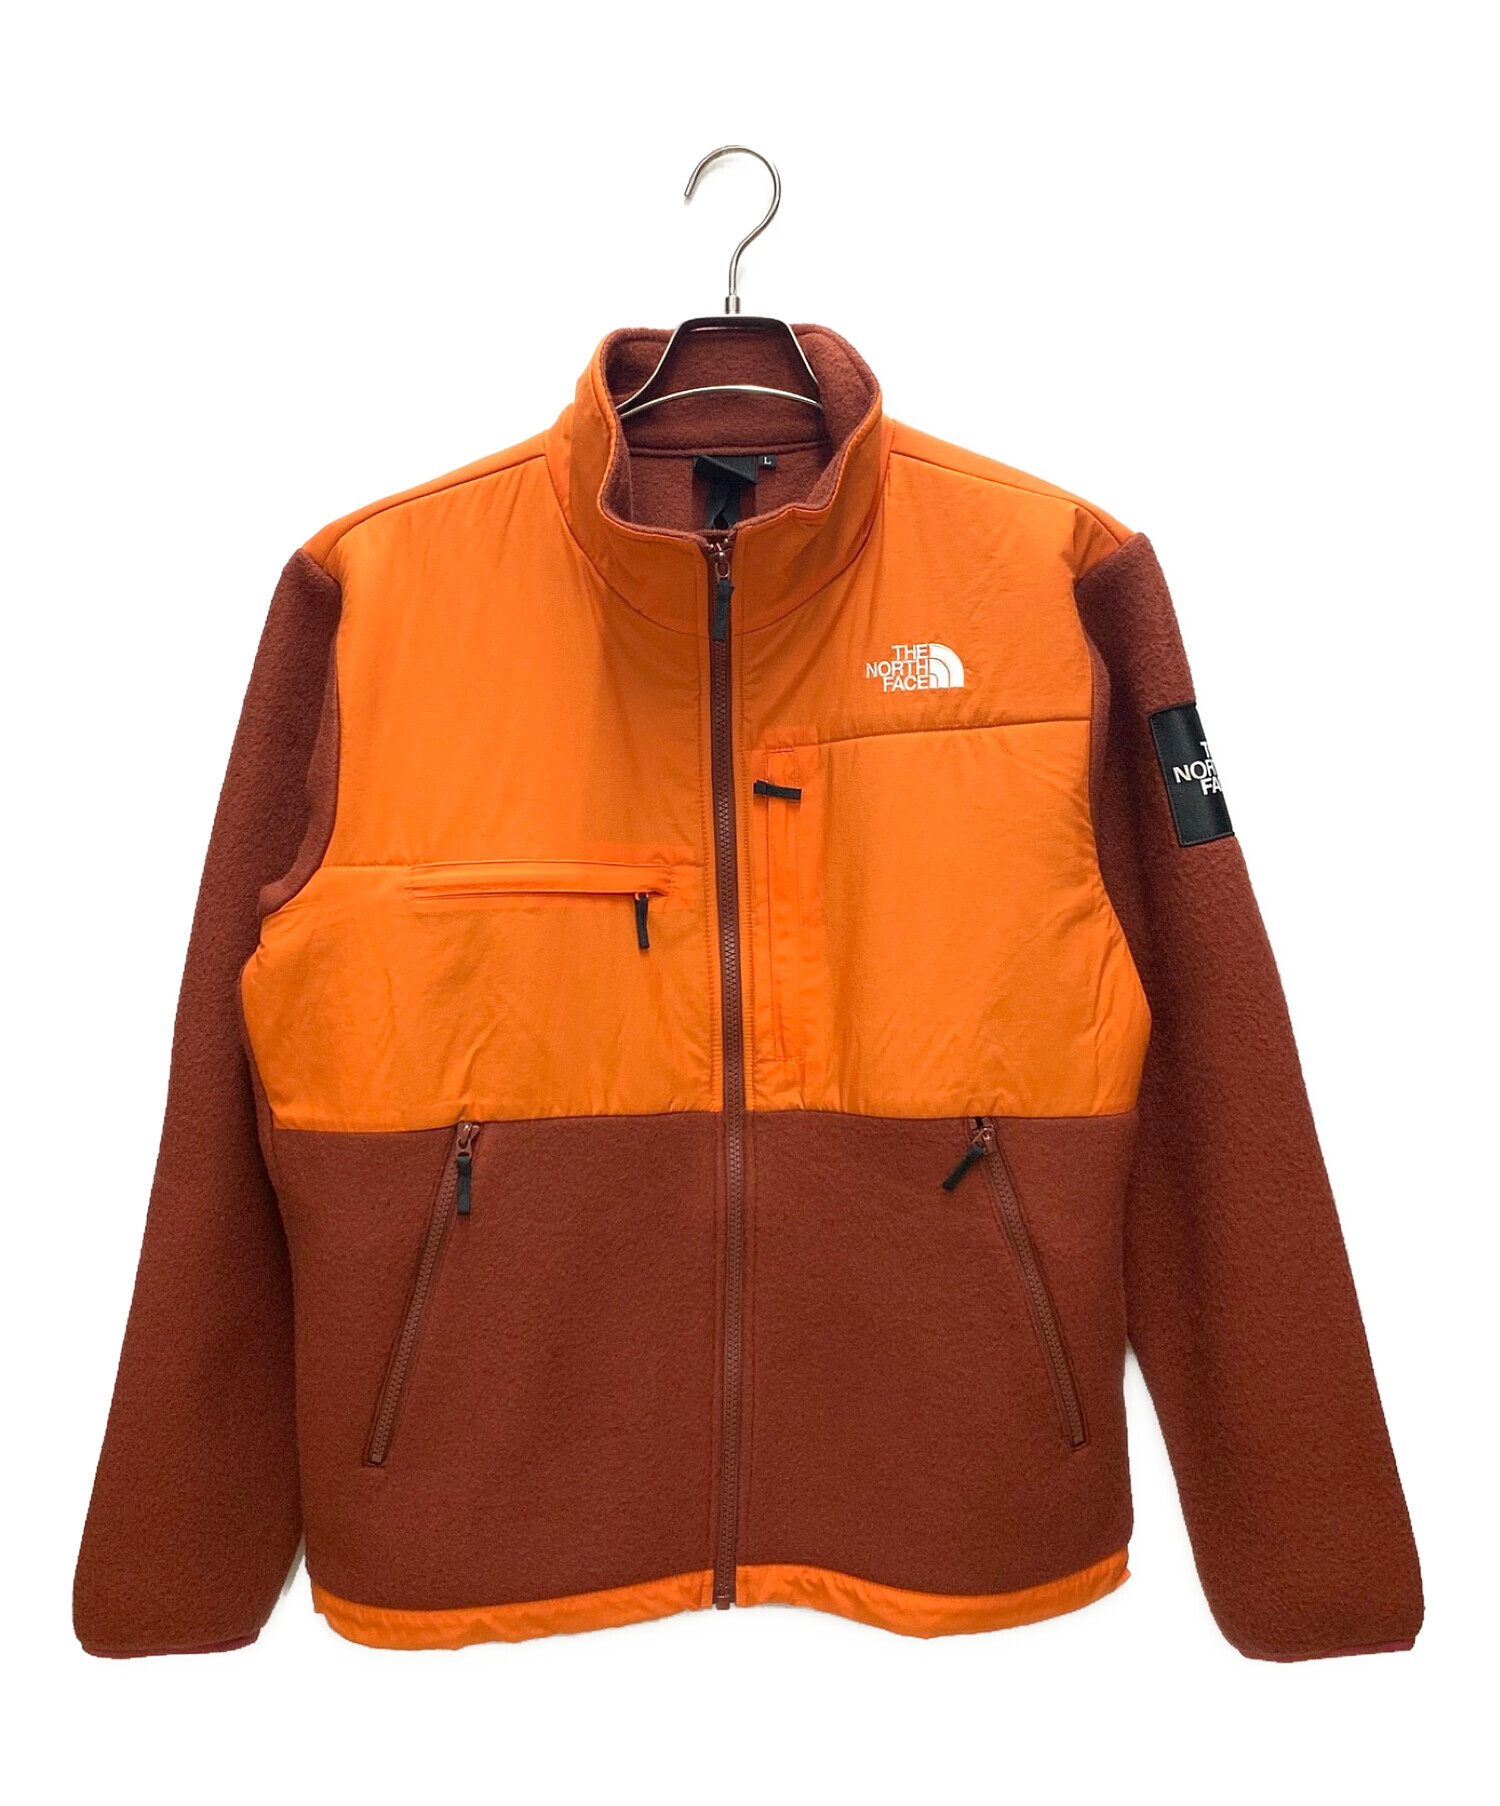 THE NORTH FACE  デナリジャケット 新品未使用